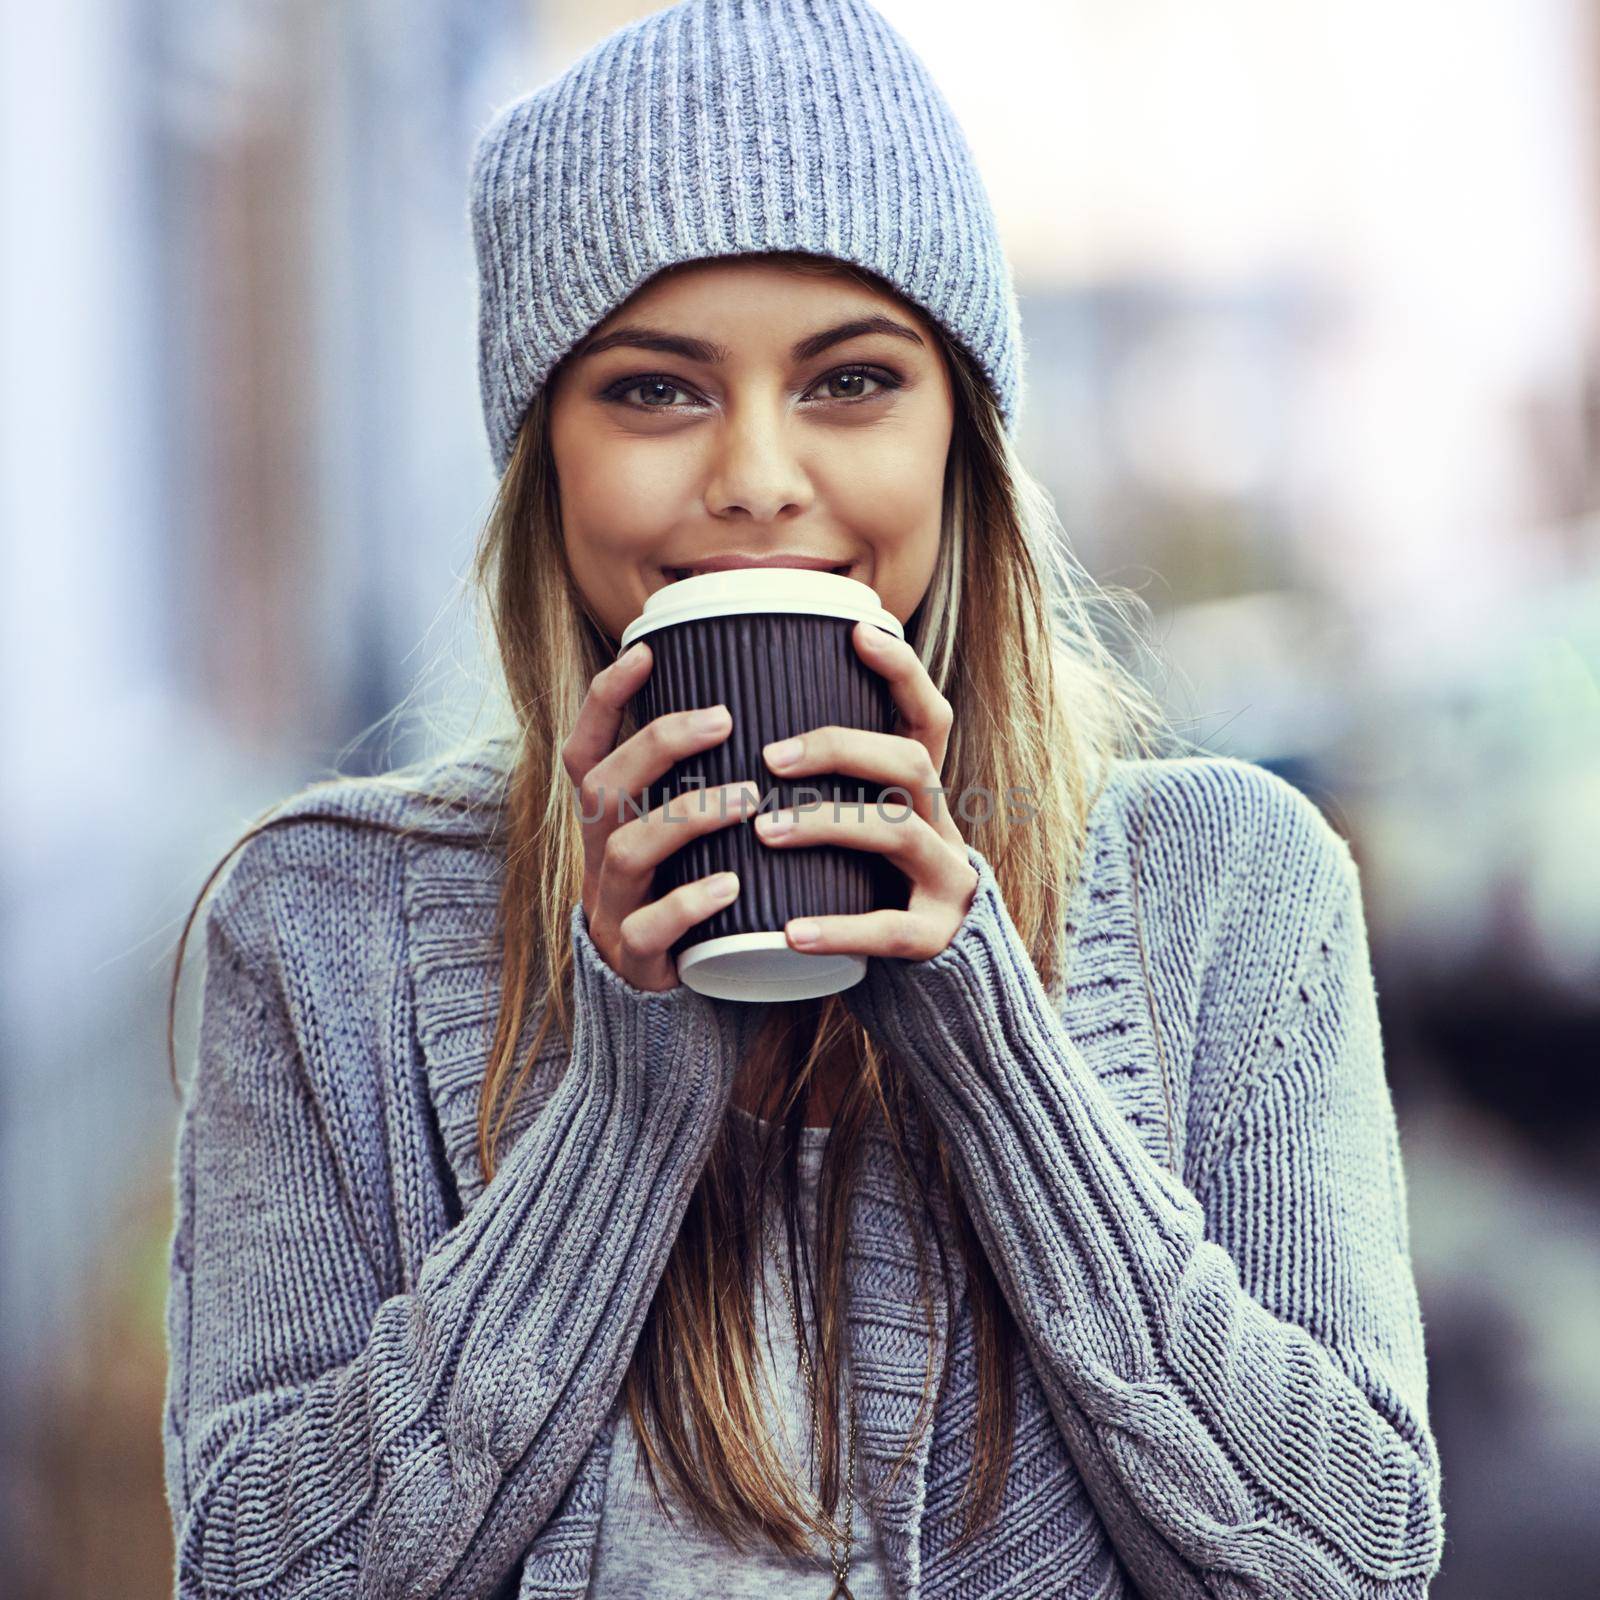 Shes just been to her favorite coffee place. Portrait of a beautful young woman drinking coffee while out in the city